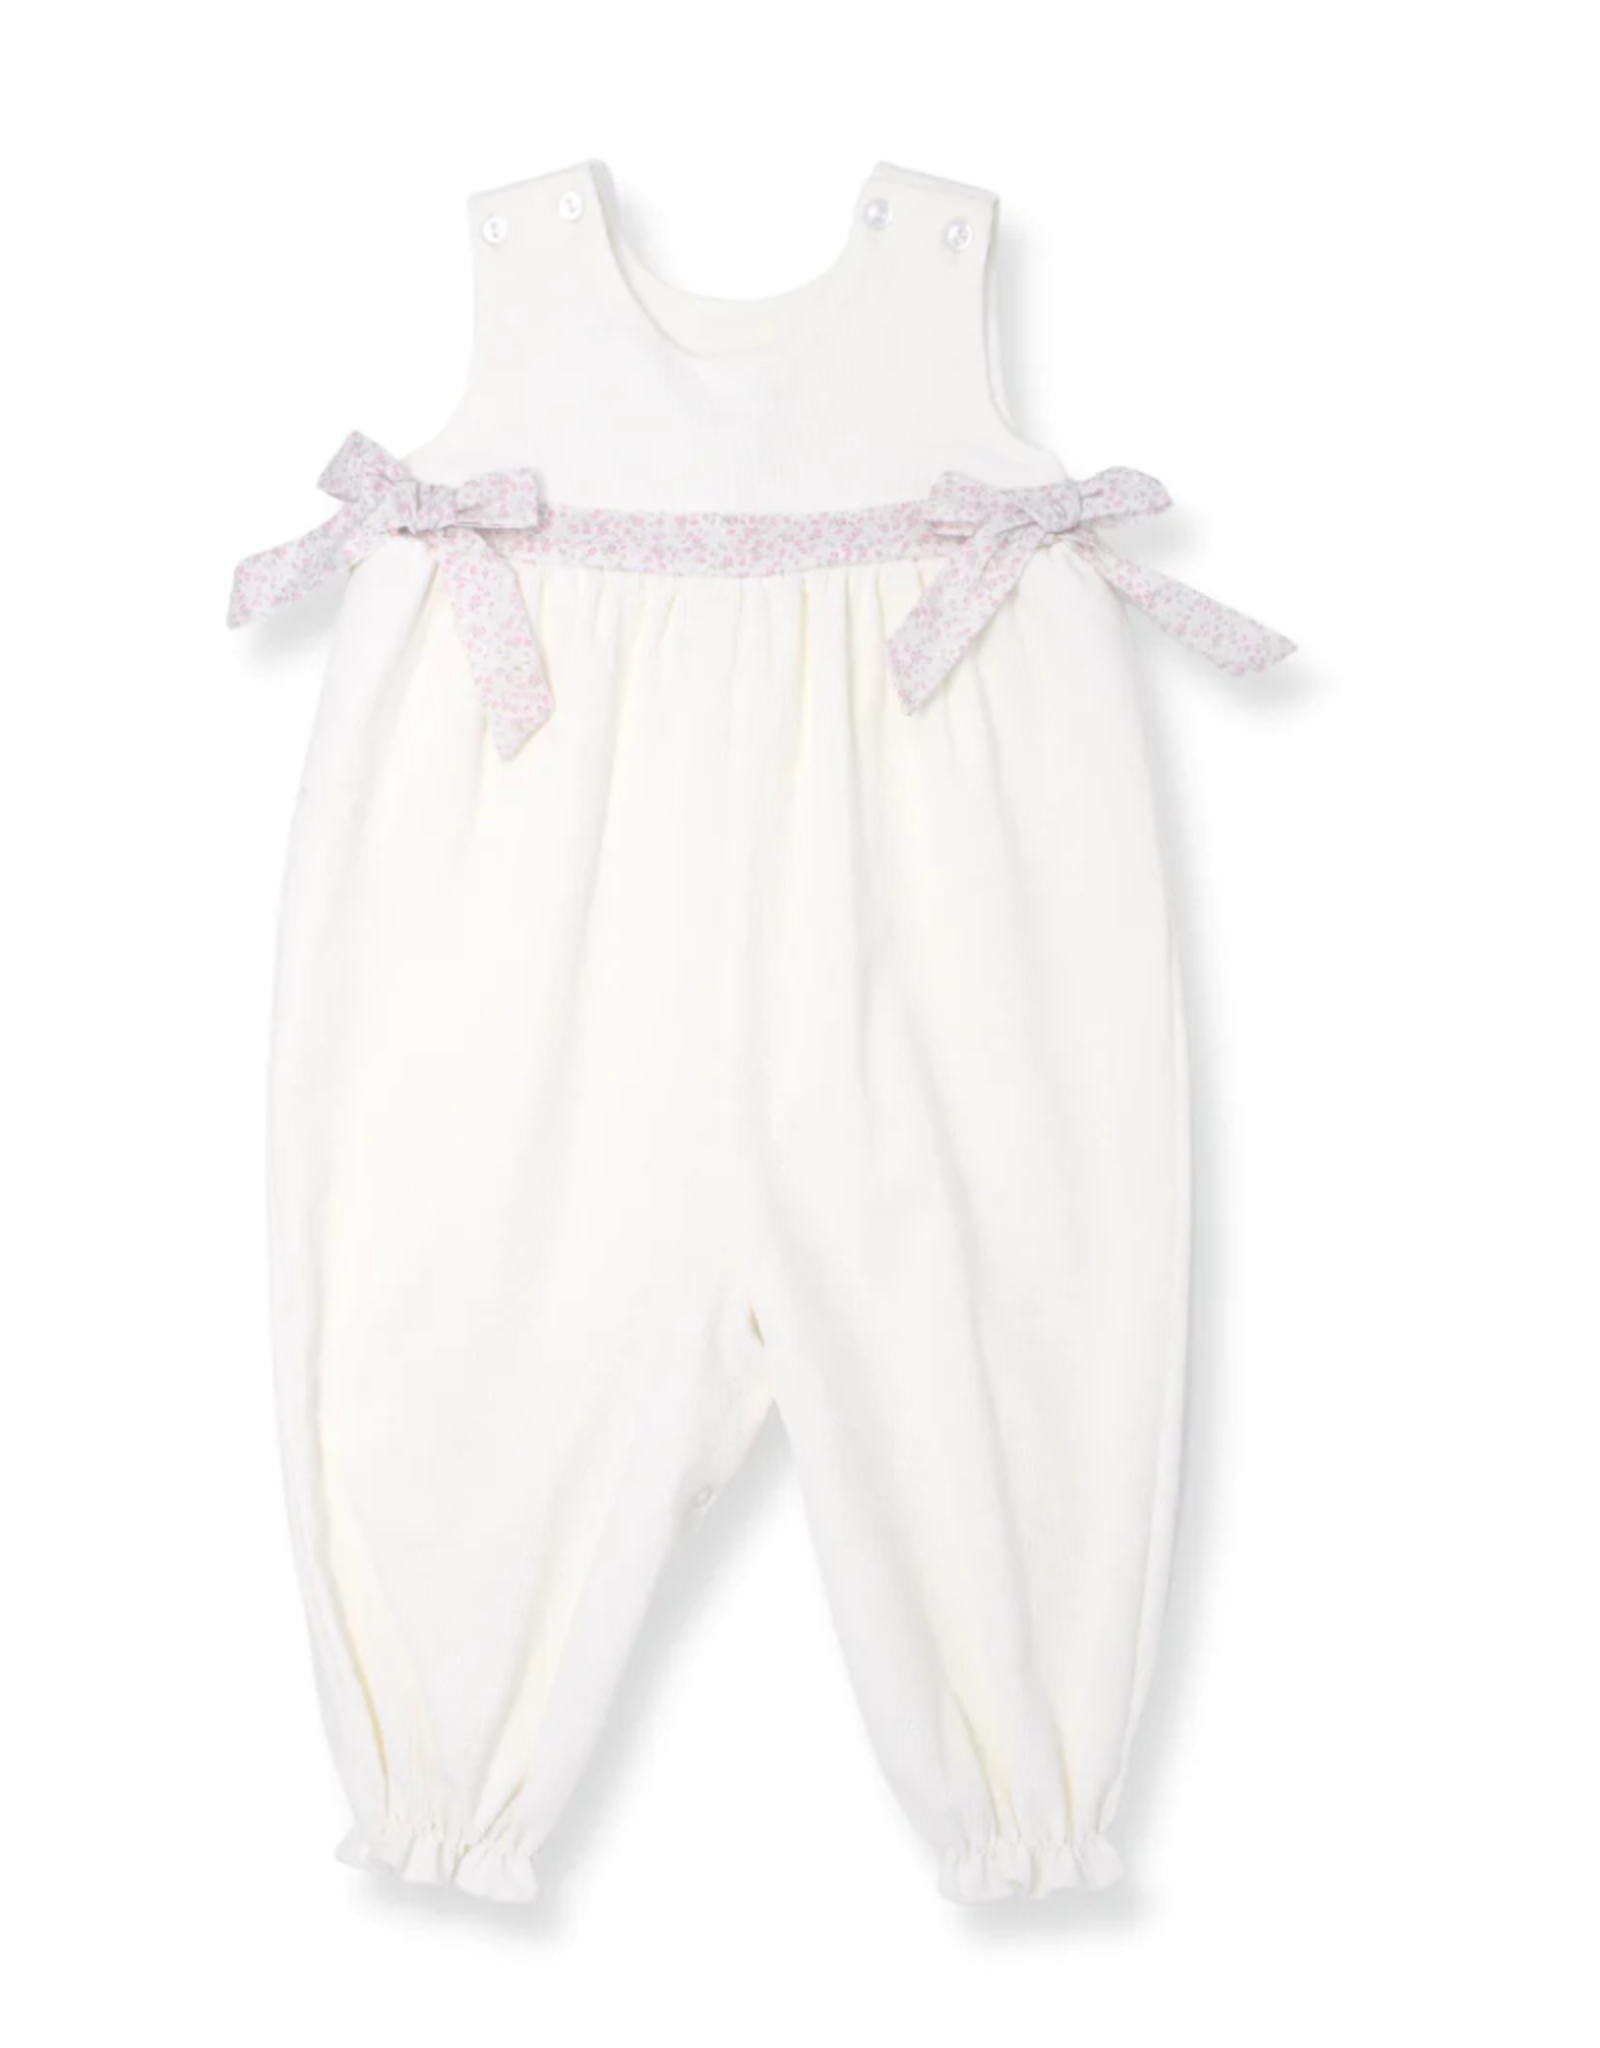 LullabySet Rosie Romper, White Cord and Floral